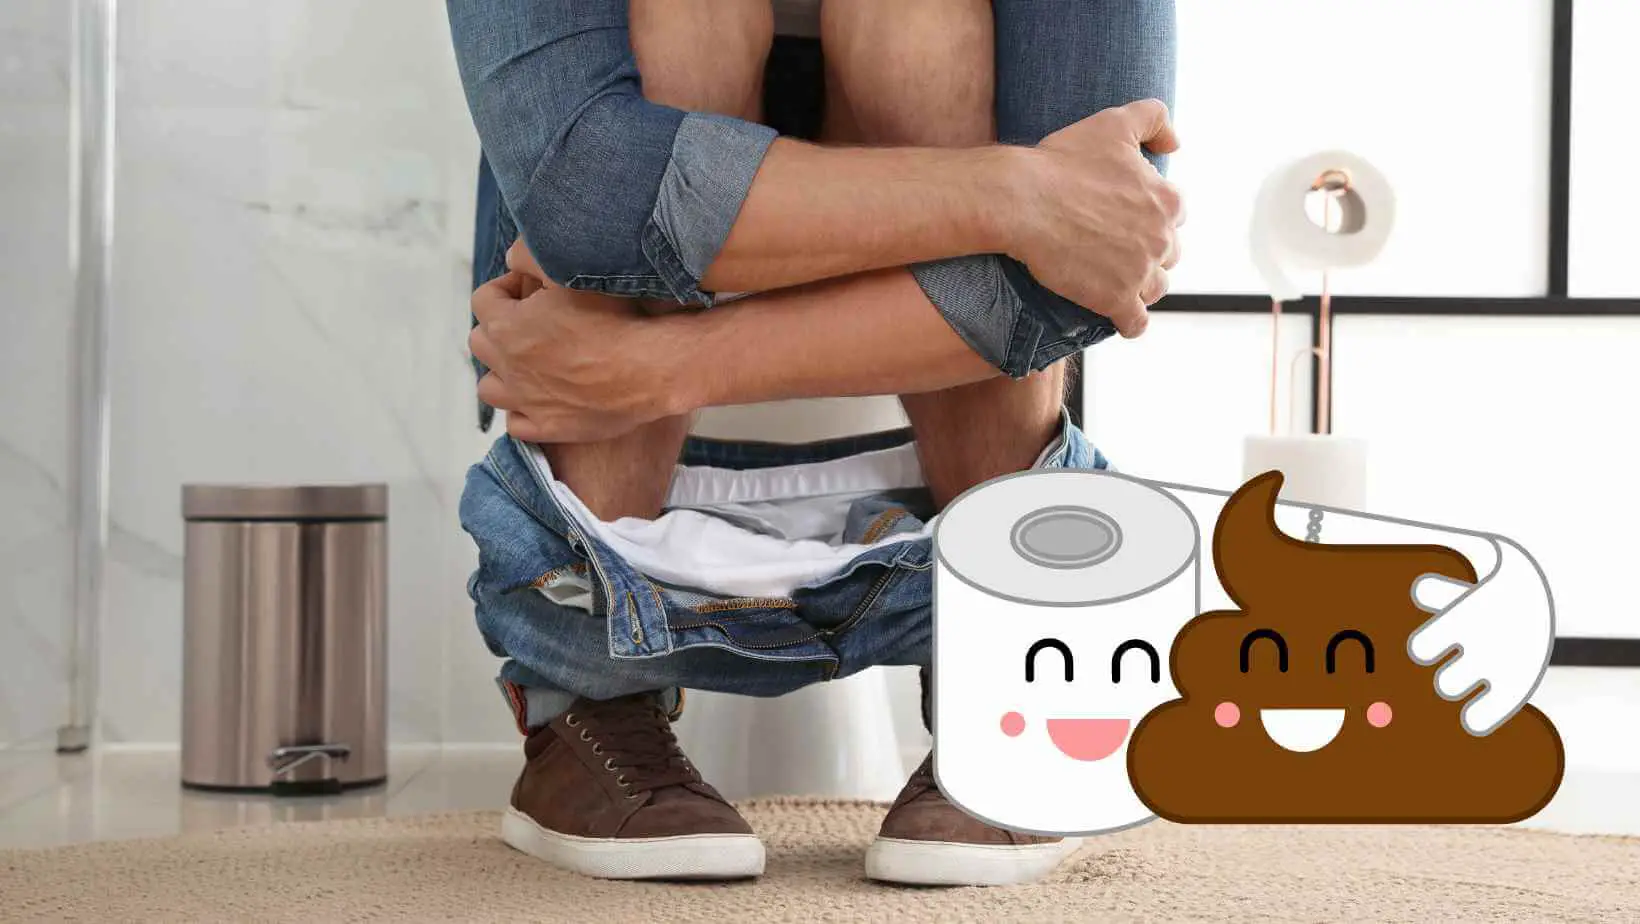 Prevent Poop from Sticking to Toilet Bowl